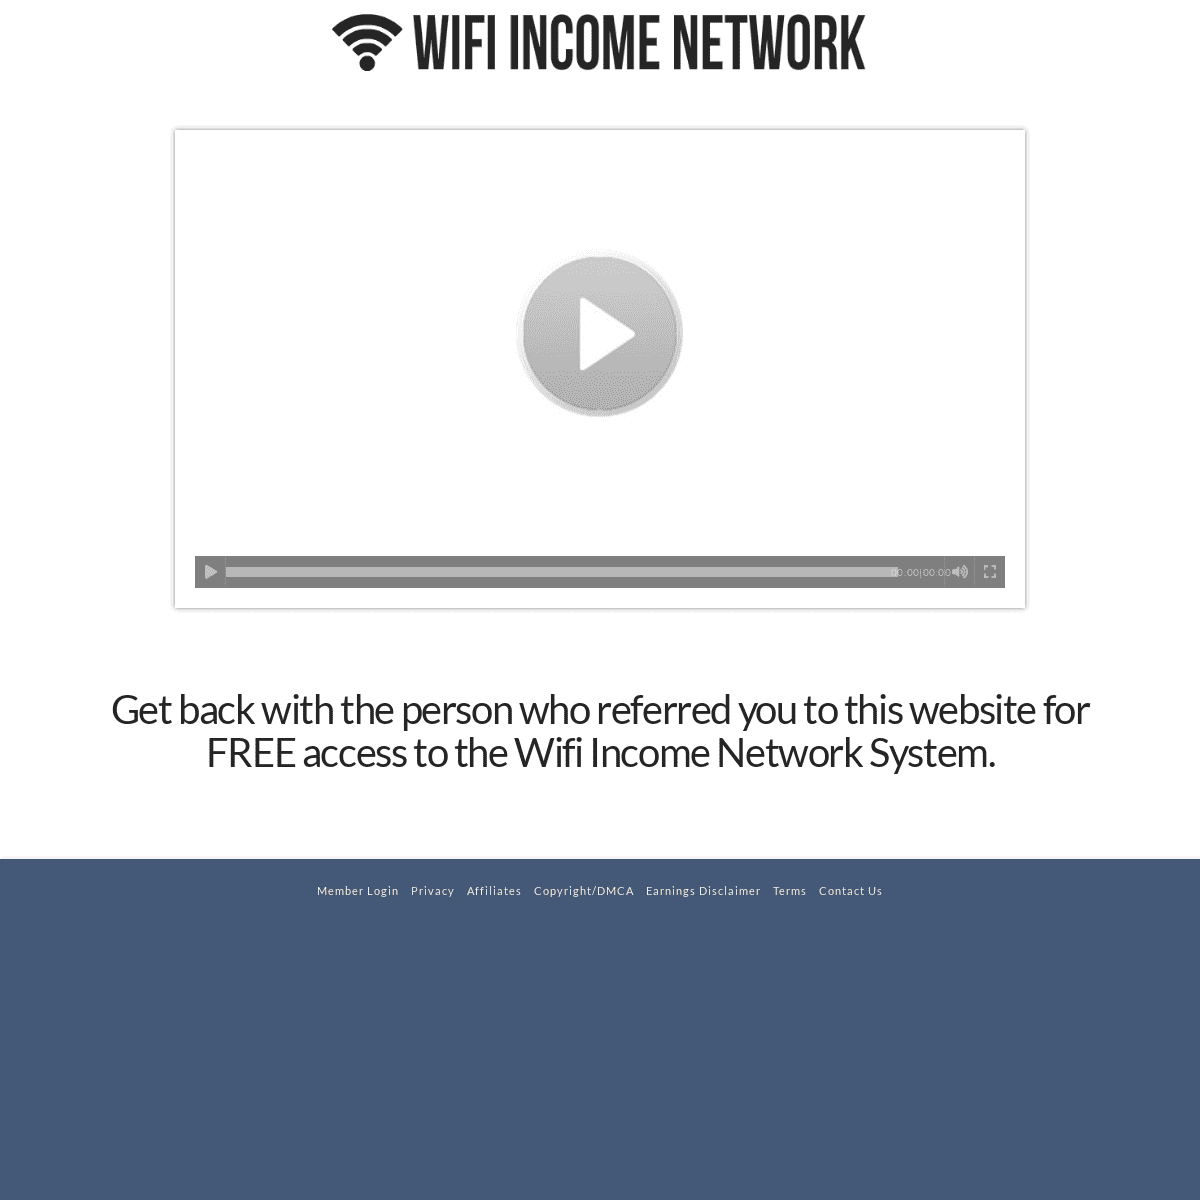 A complete backup of wifiincomenetwork.com